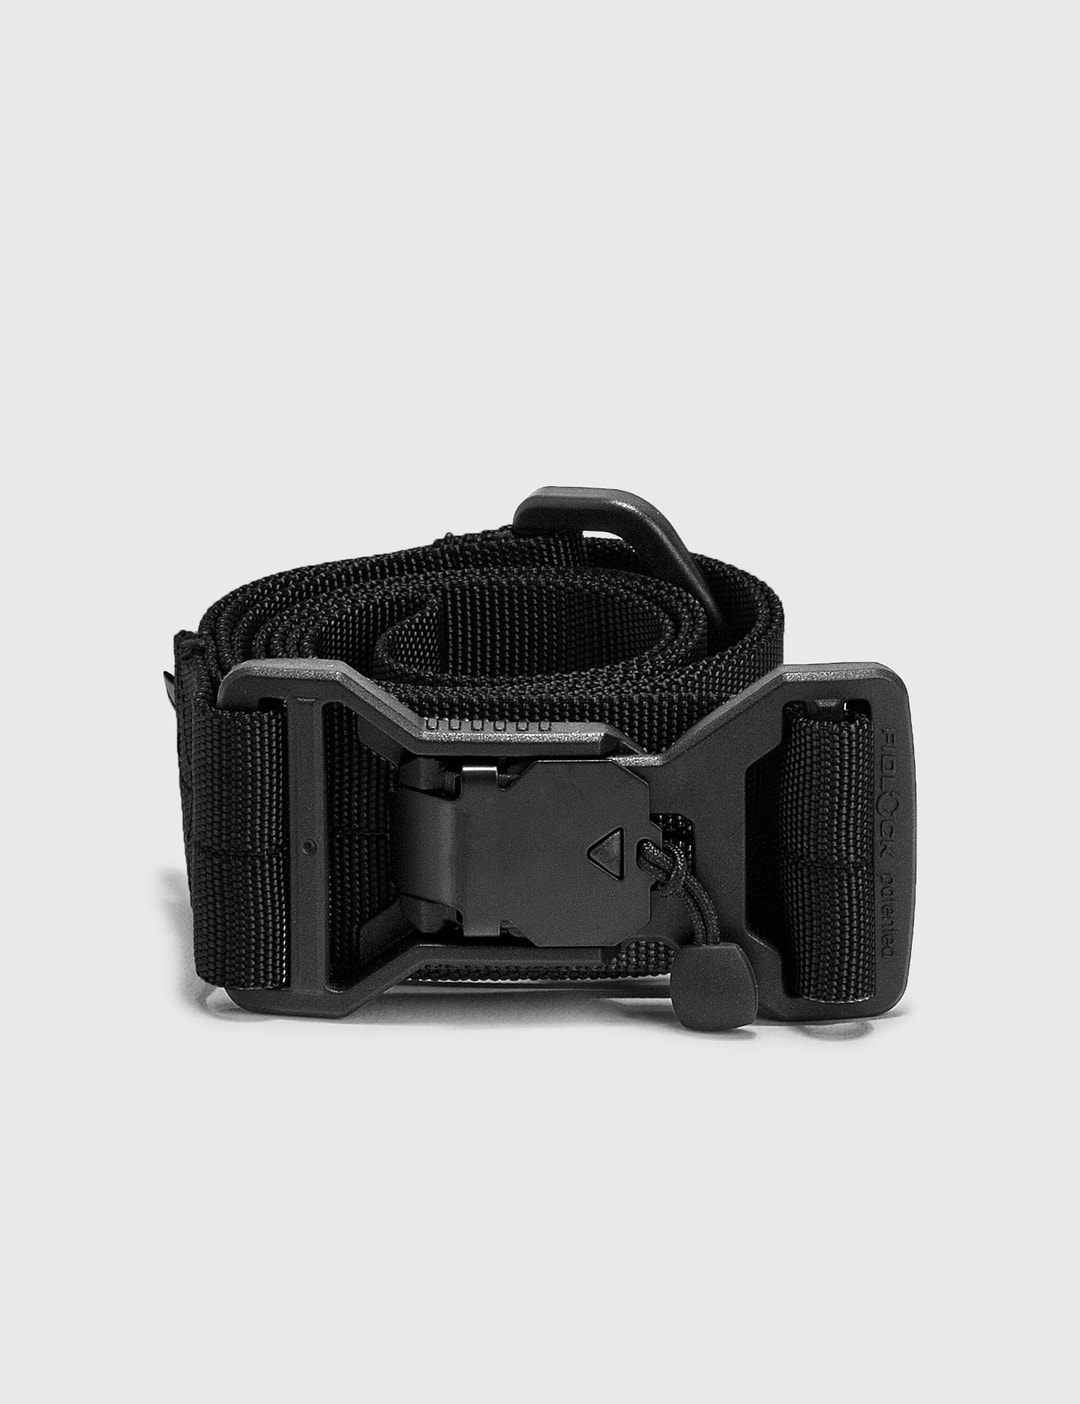 Comfy Outdoor Garment - Fidlock Belt | HBX - Globally Curated Fashion ...